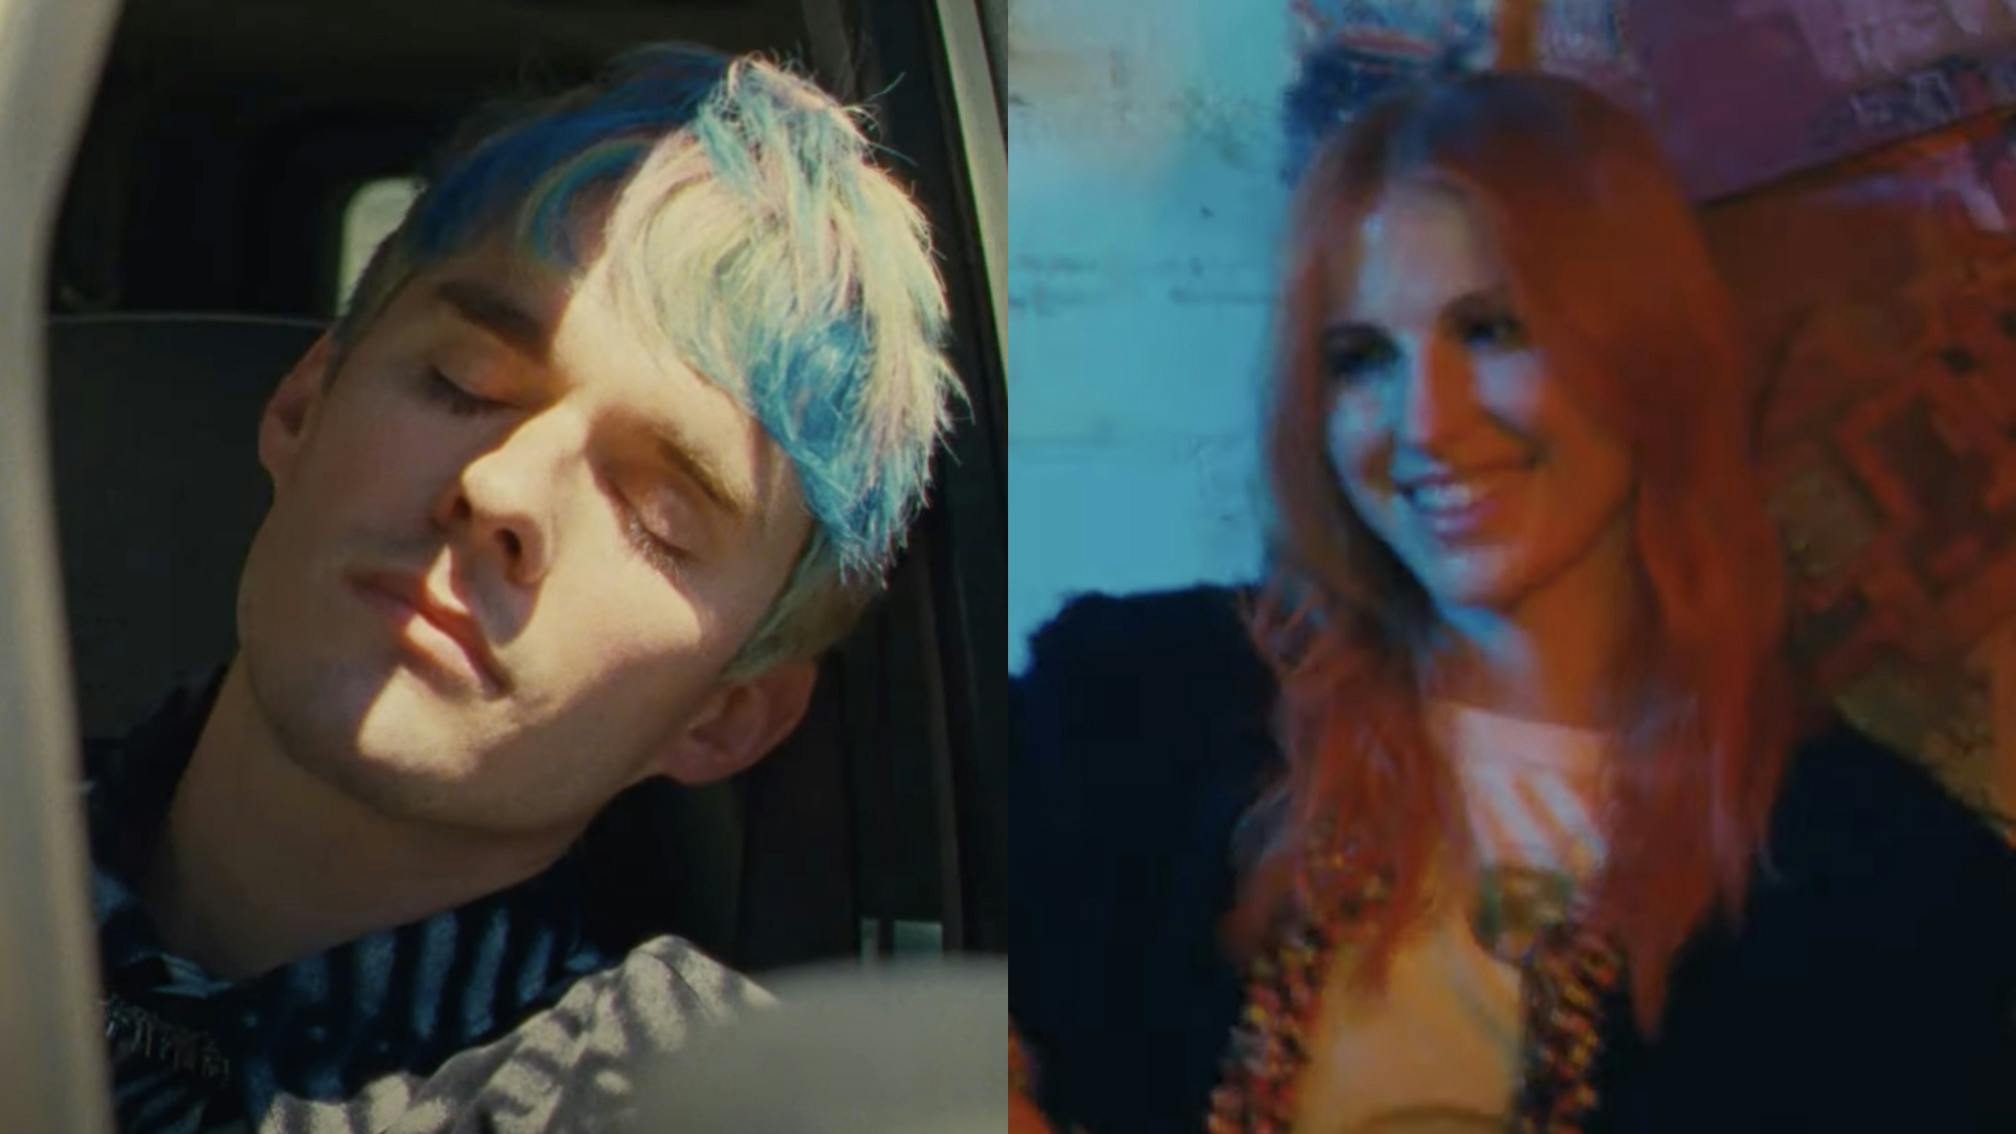 New Good Dye Young METALHEADS commercial stars Hayley Williams, Awsten Knight